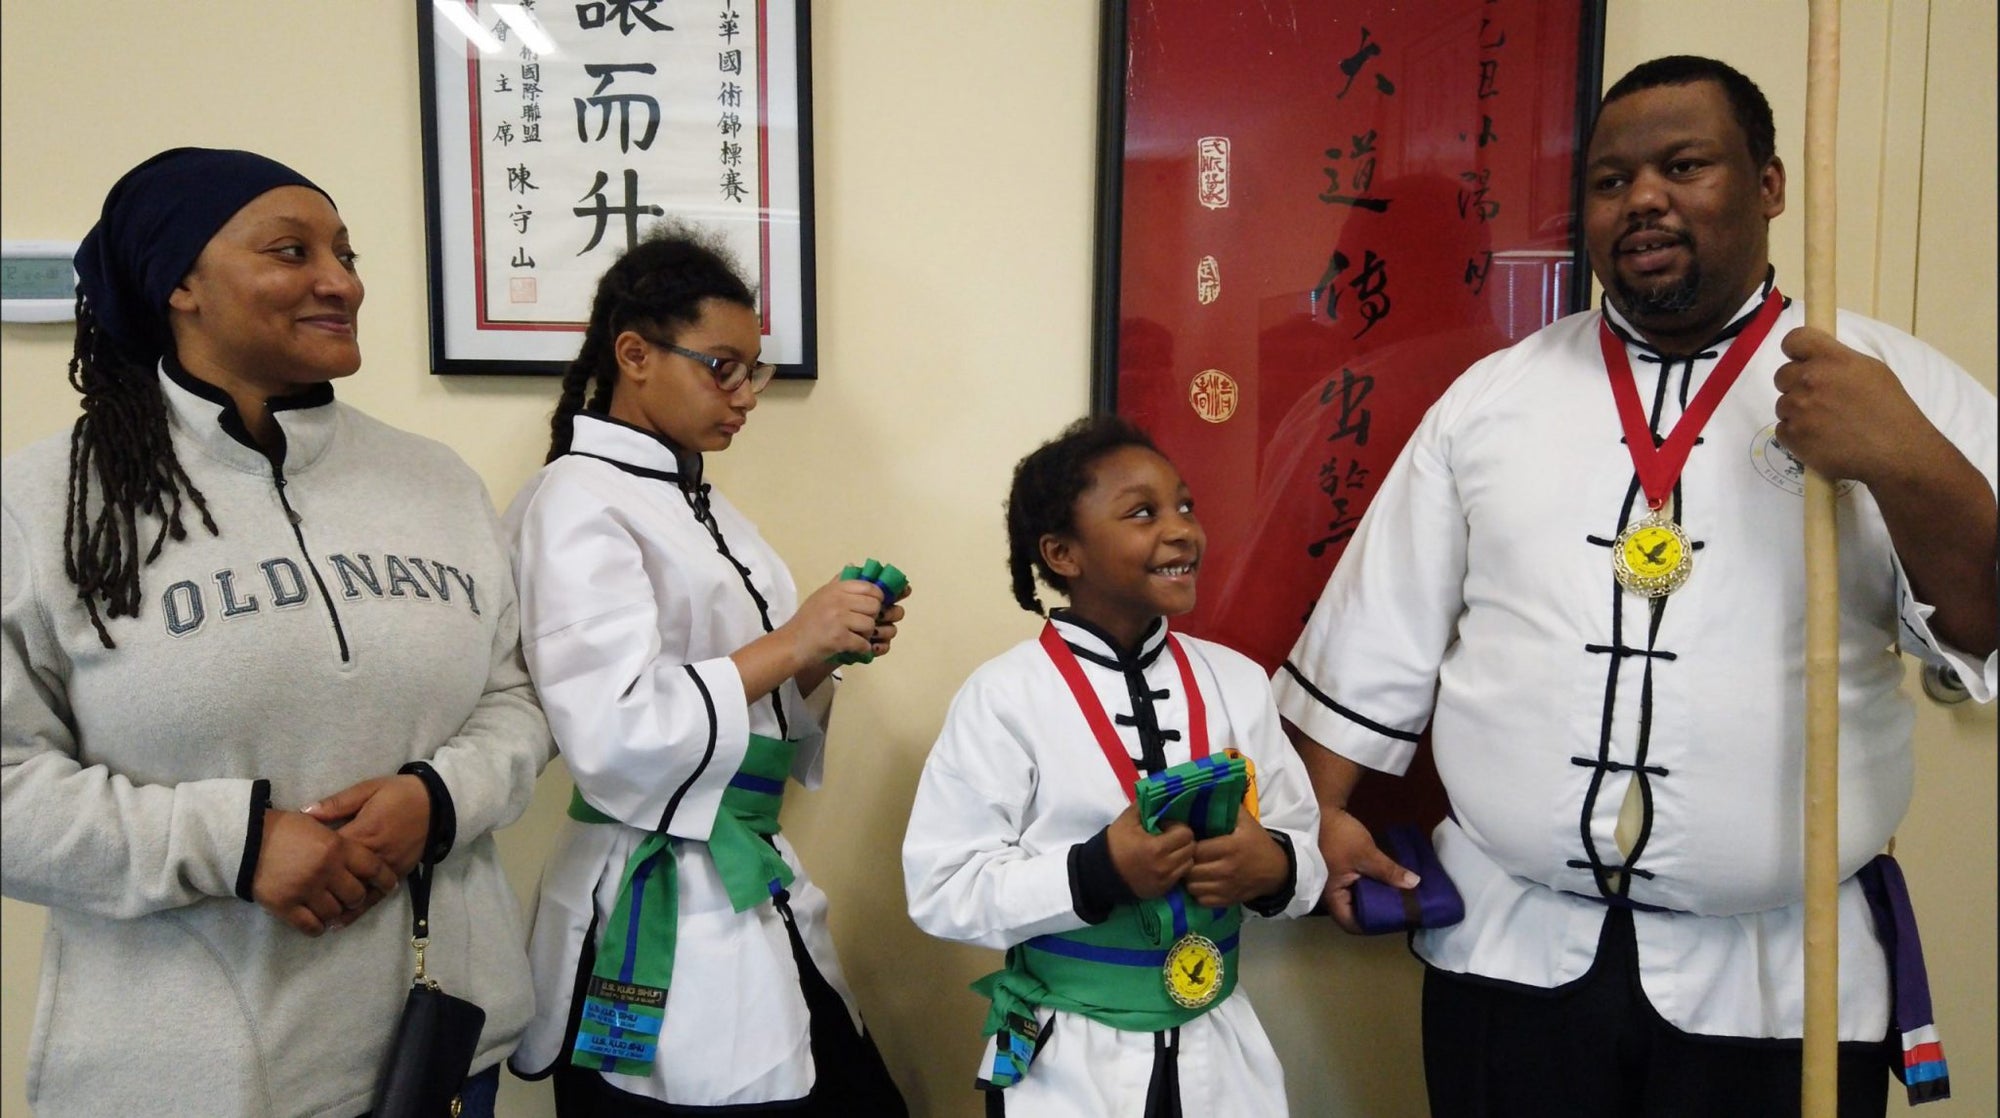 Train with the Whole Family and Develop Personal Growth at US KUO SHU ACADEMY